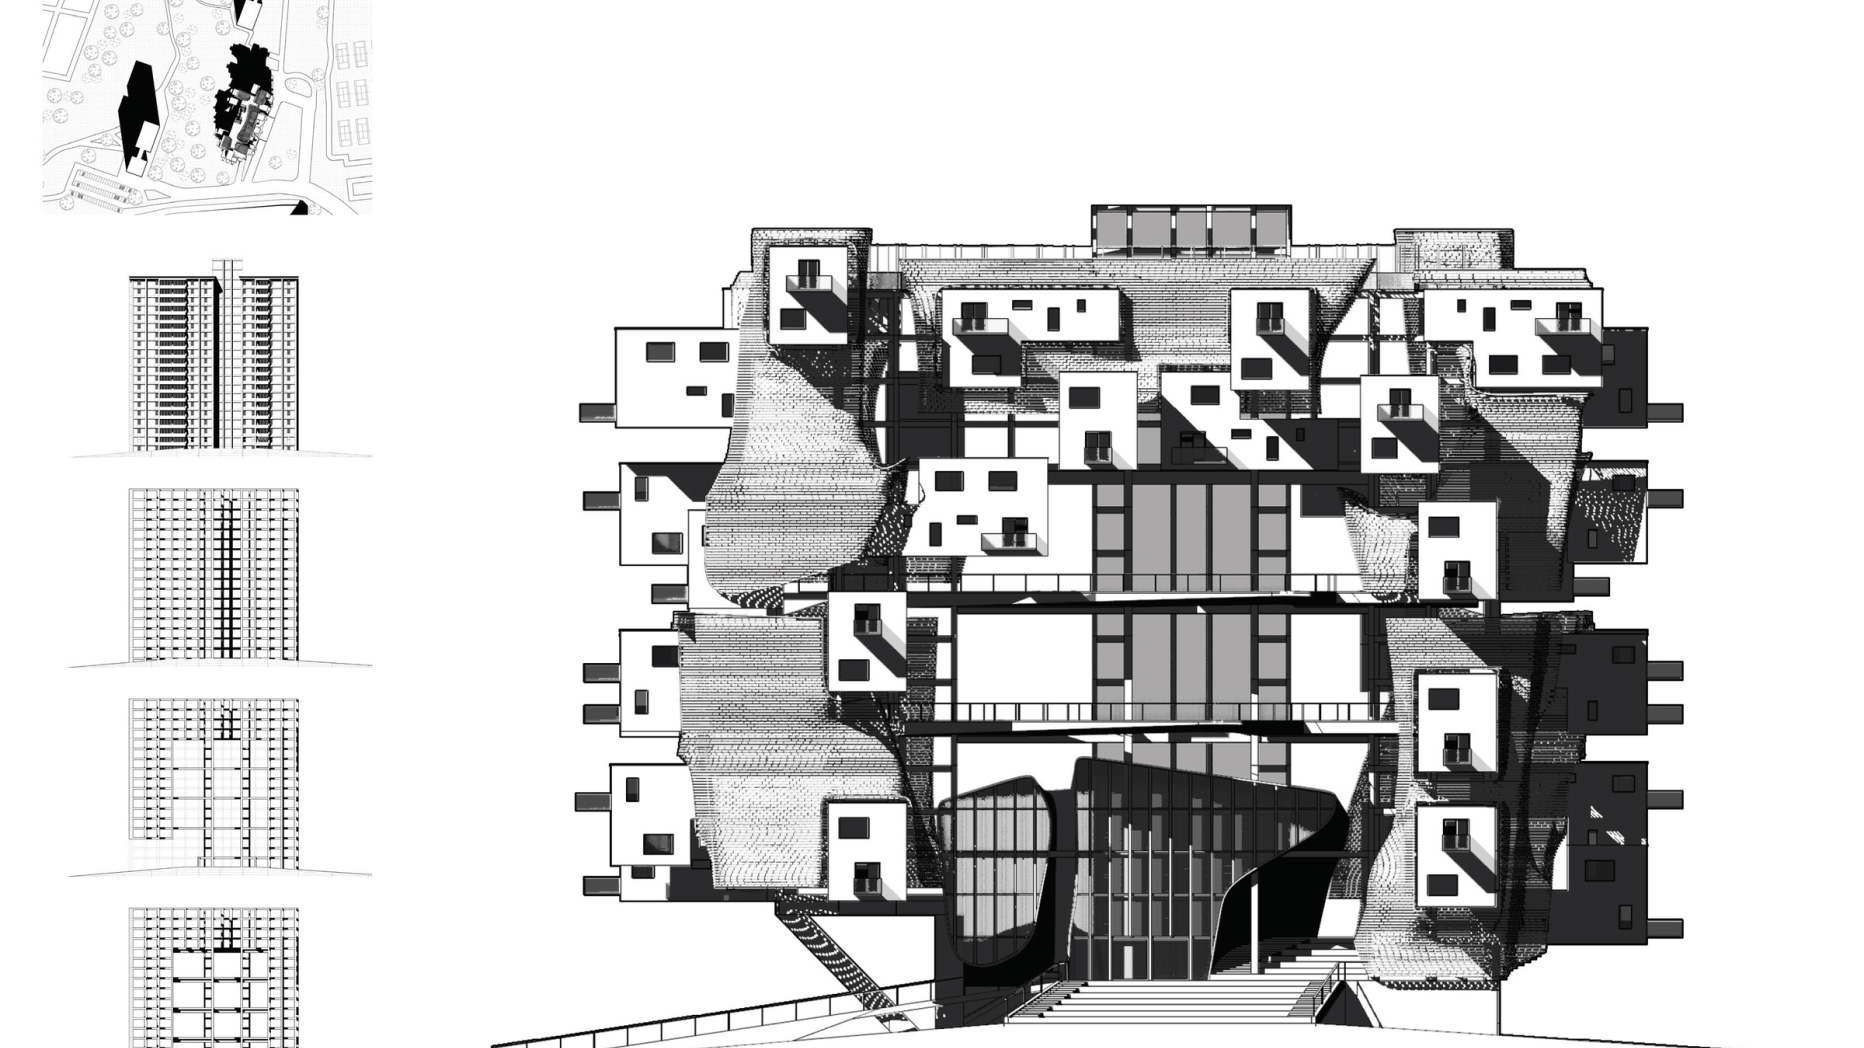 Drawing of apartment building in which many rooms stick out from the building in cubic protrusions